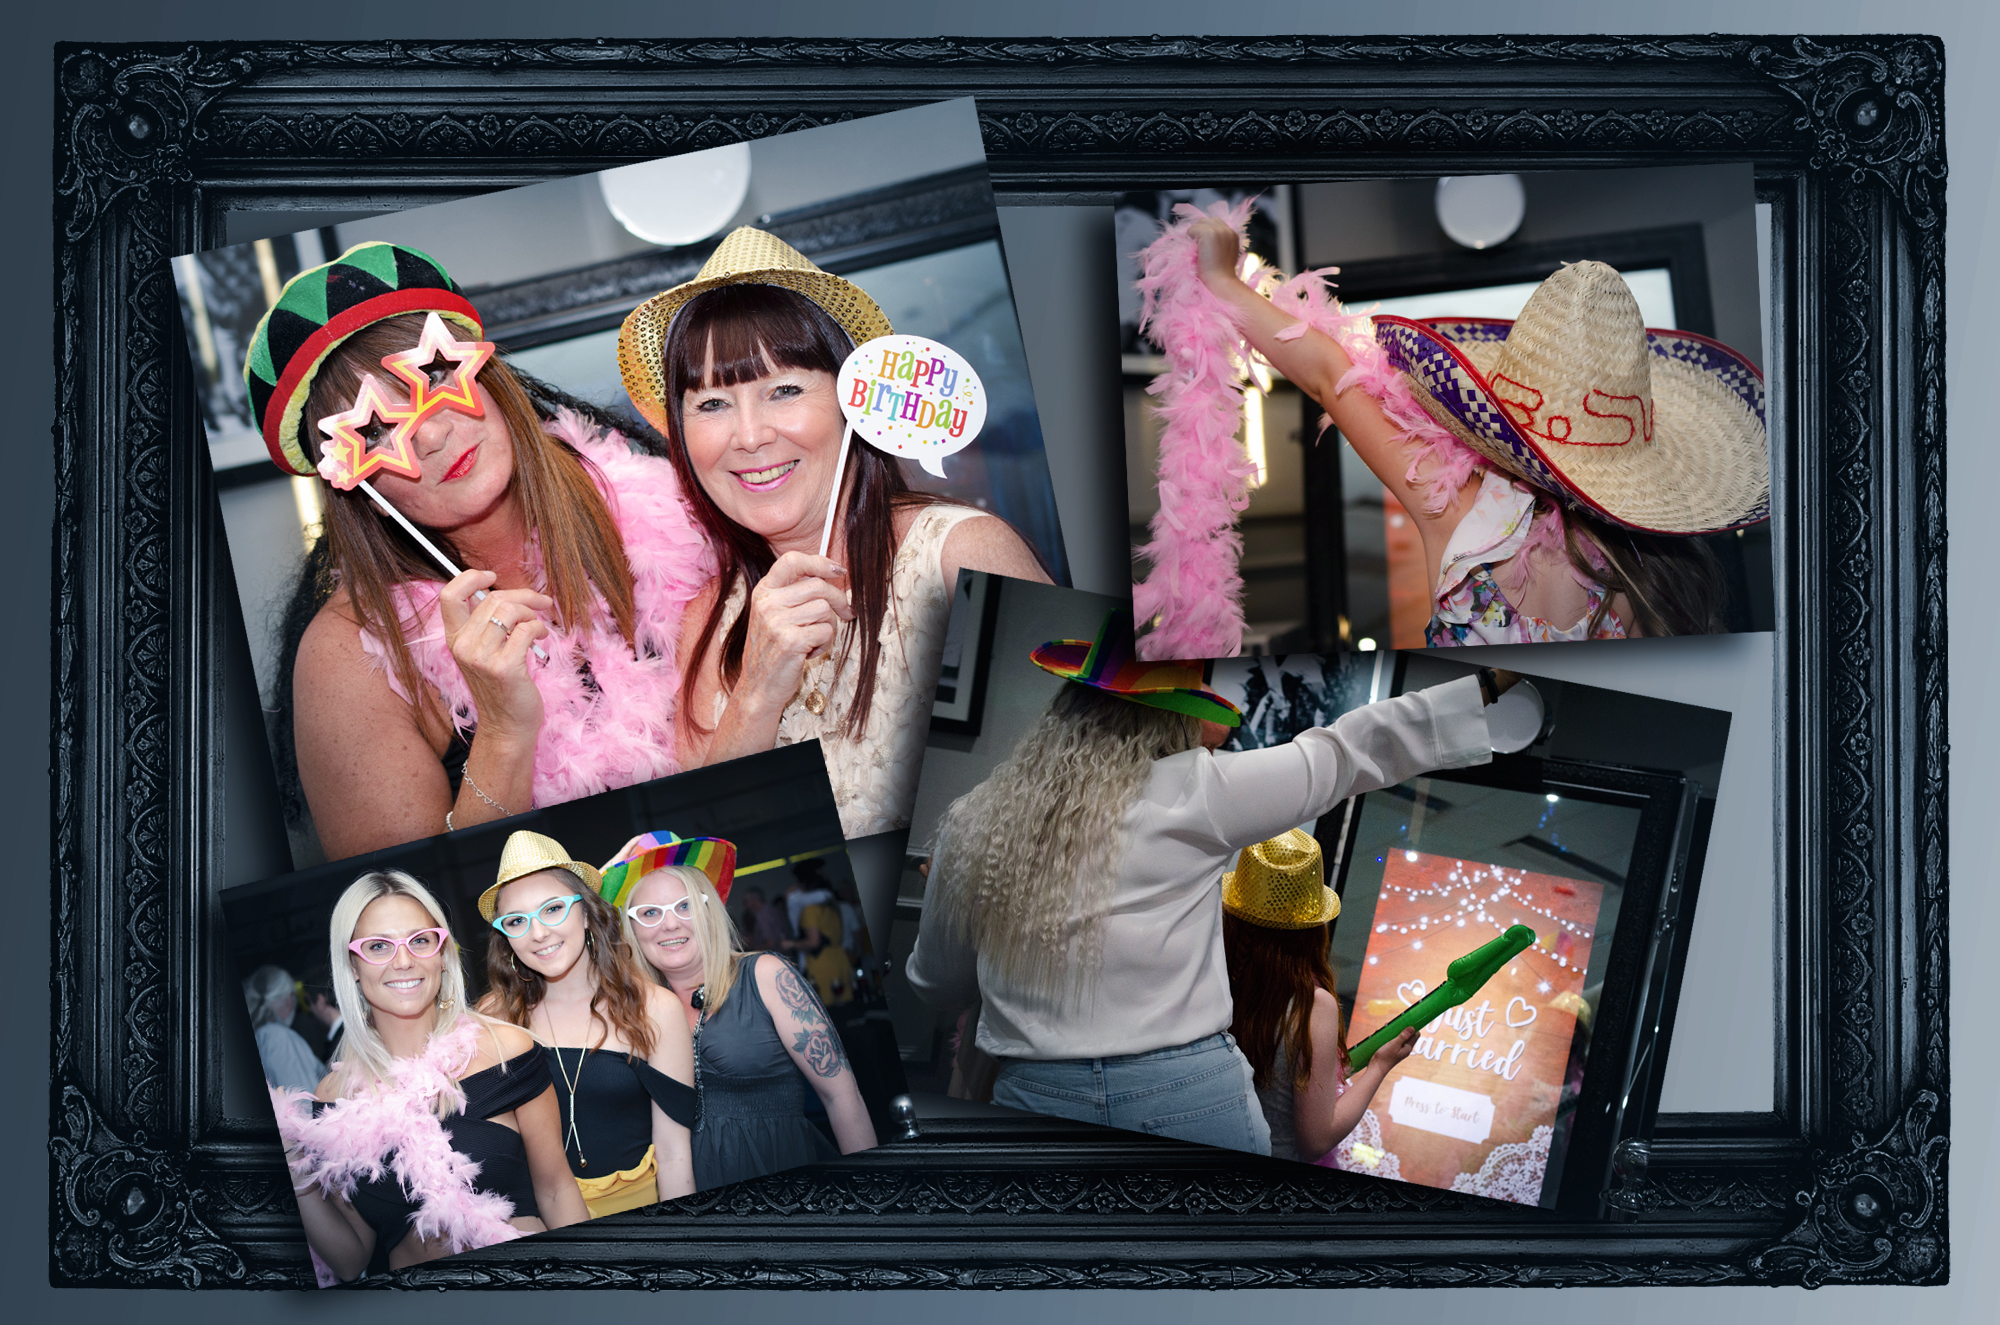  Jam Entertainment   MAGIC MIRROR PHOTO BOOTH    Find out more  